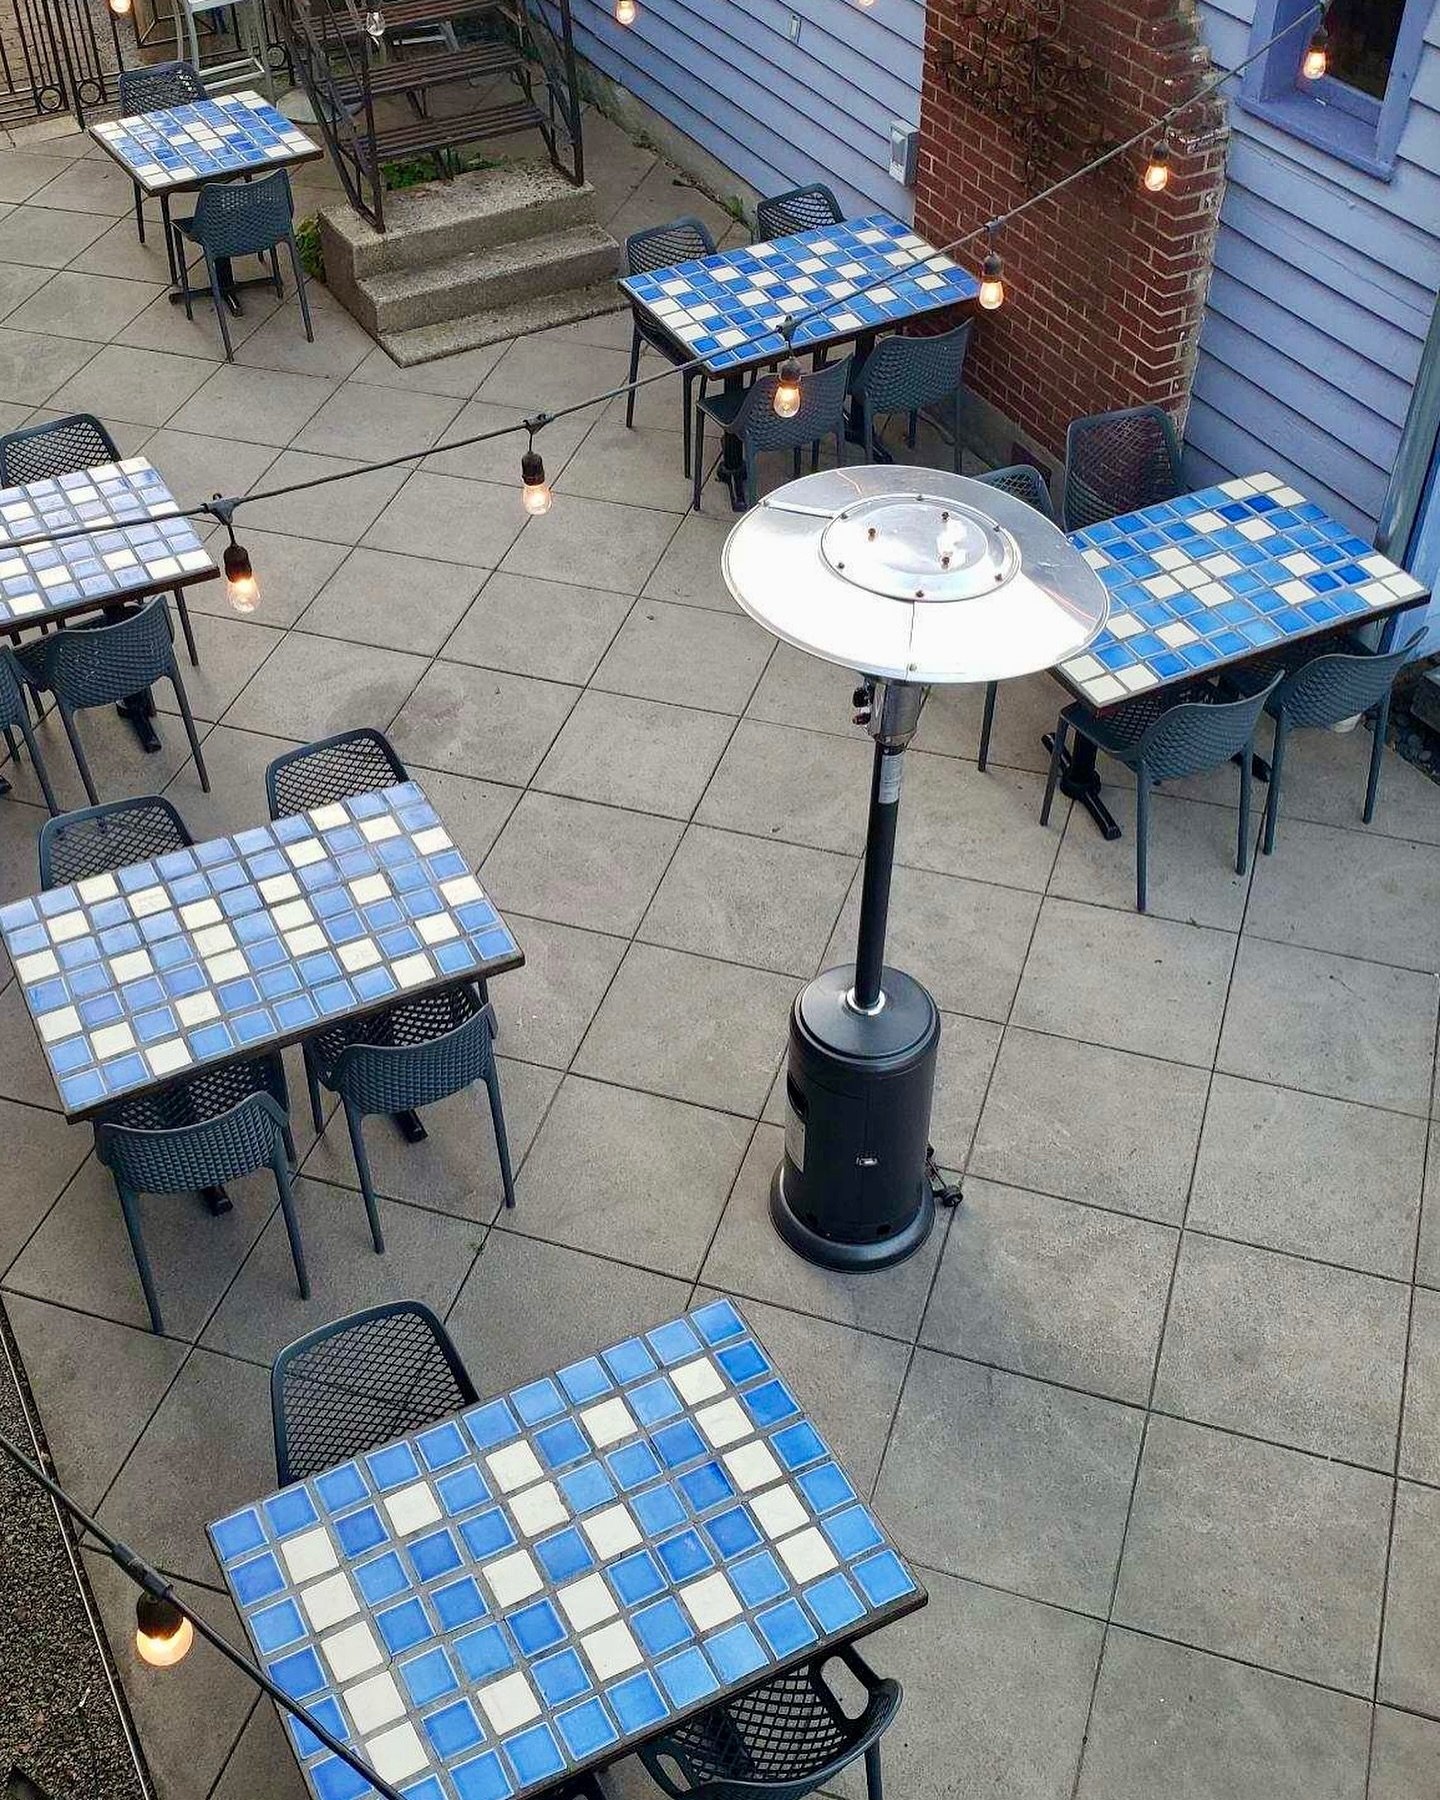 Our patio is missing YOU! Our patio welcomes you beginning Mother&rsquo;s Day~have you made your Sunday Mom&rsquo;s Day brunch reservations yet? Oh, the joy of spring, celebrating you, your mom and everybody. #yellowsprings #mothersday #brunchtime